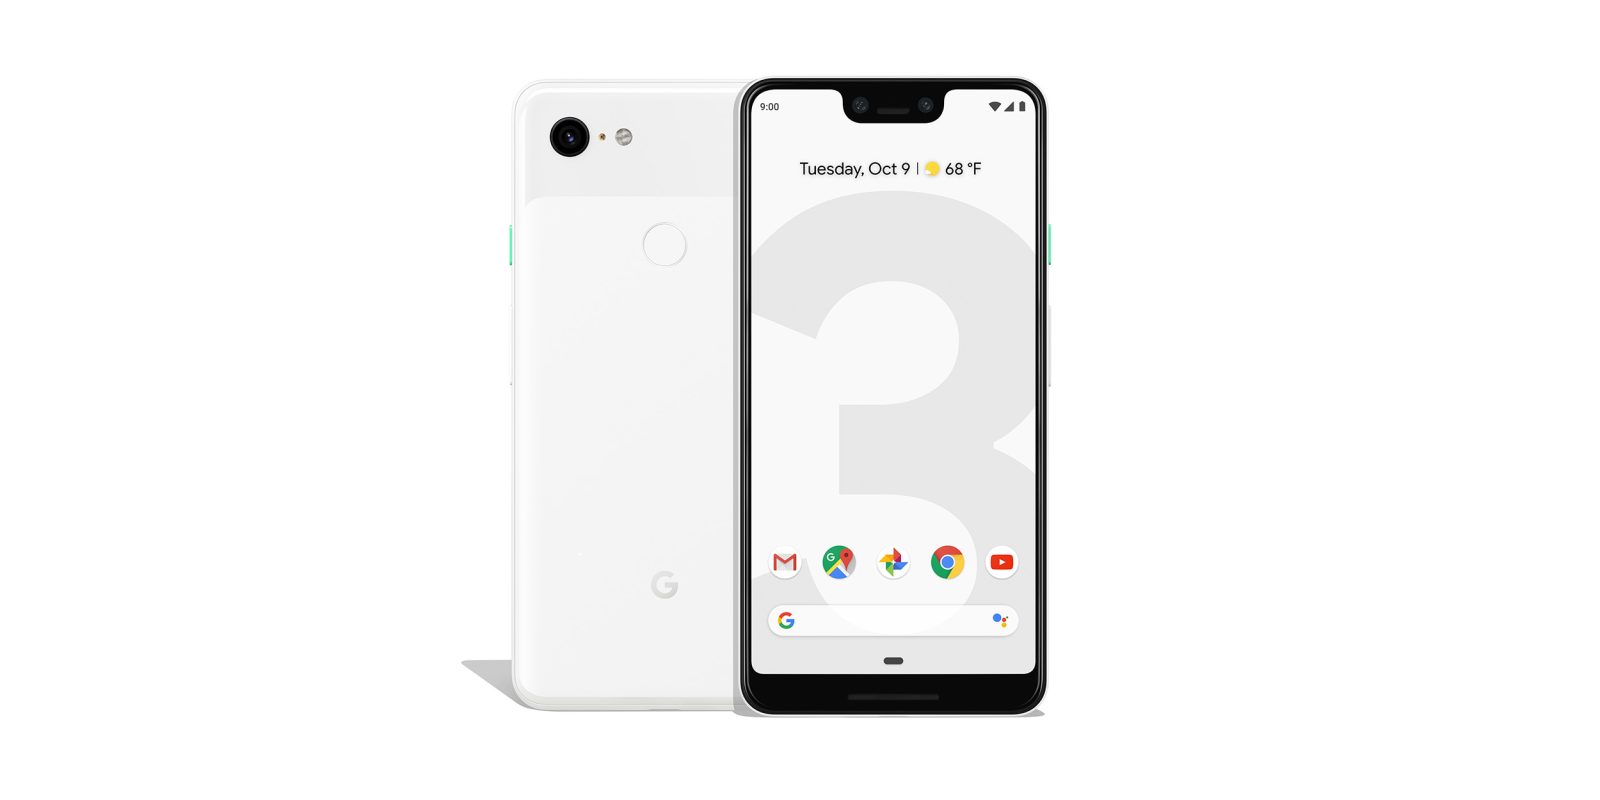 Pixel 3 XL display might a winner with 'A+' rating and award 9to5Google